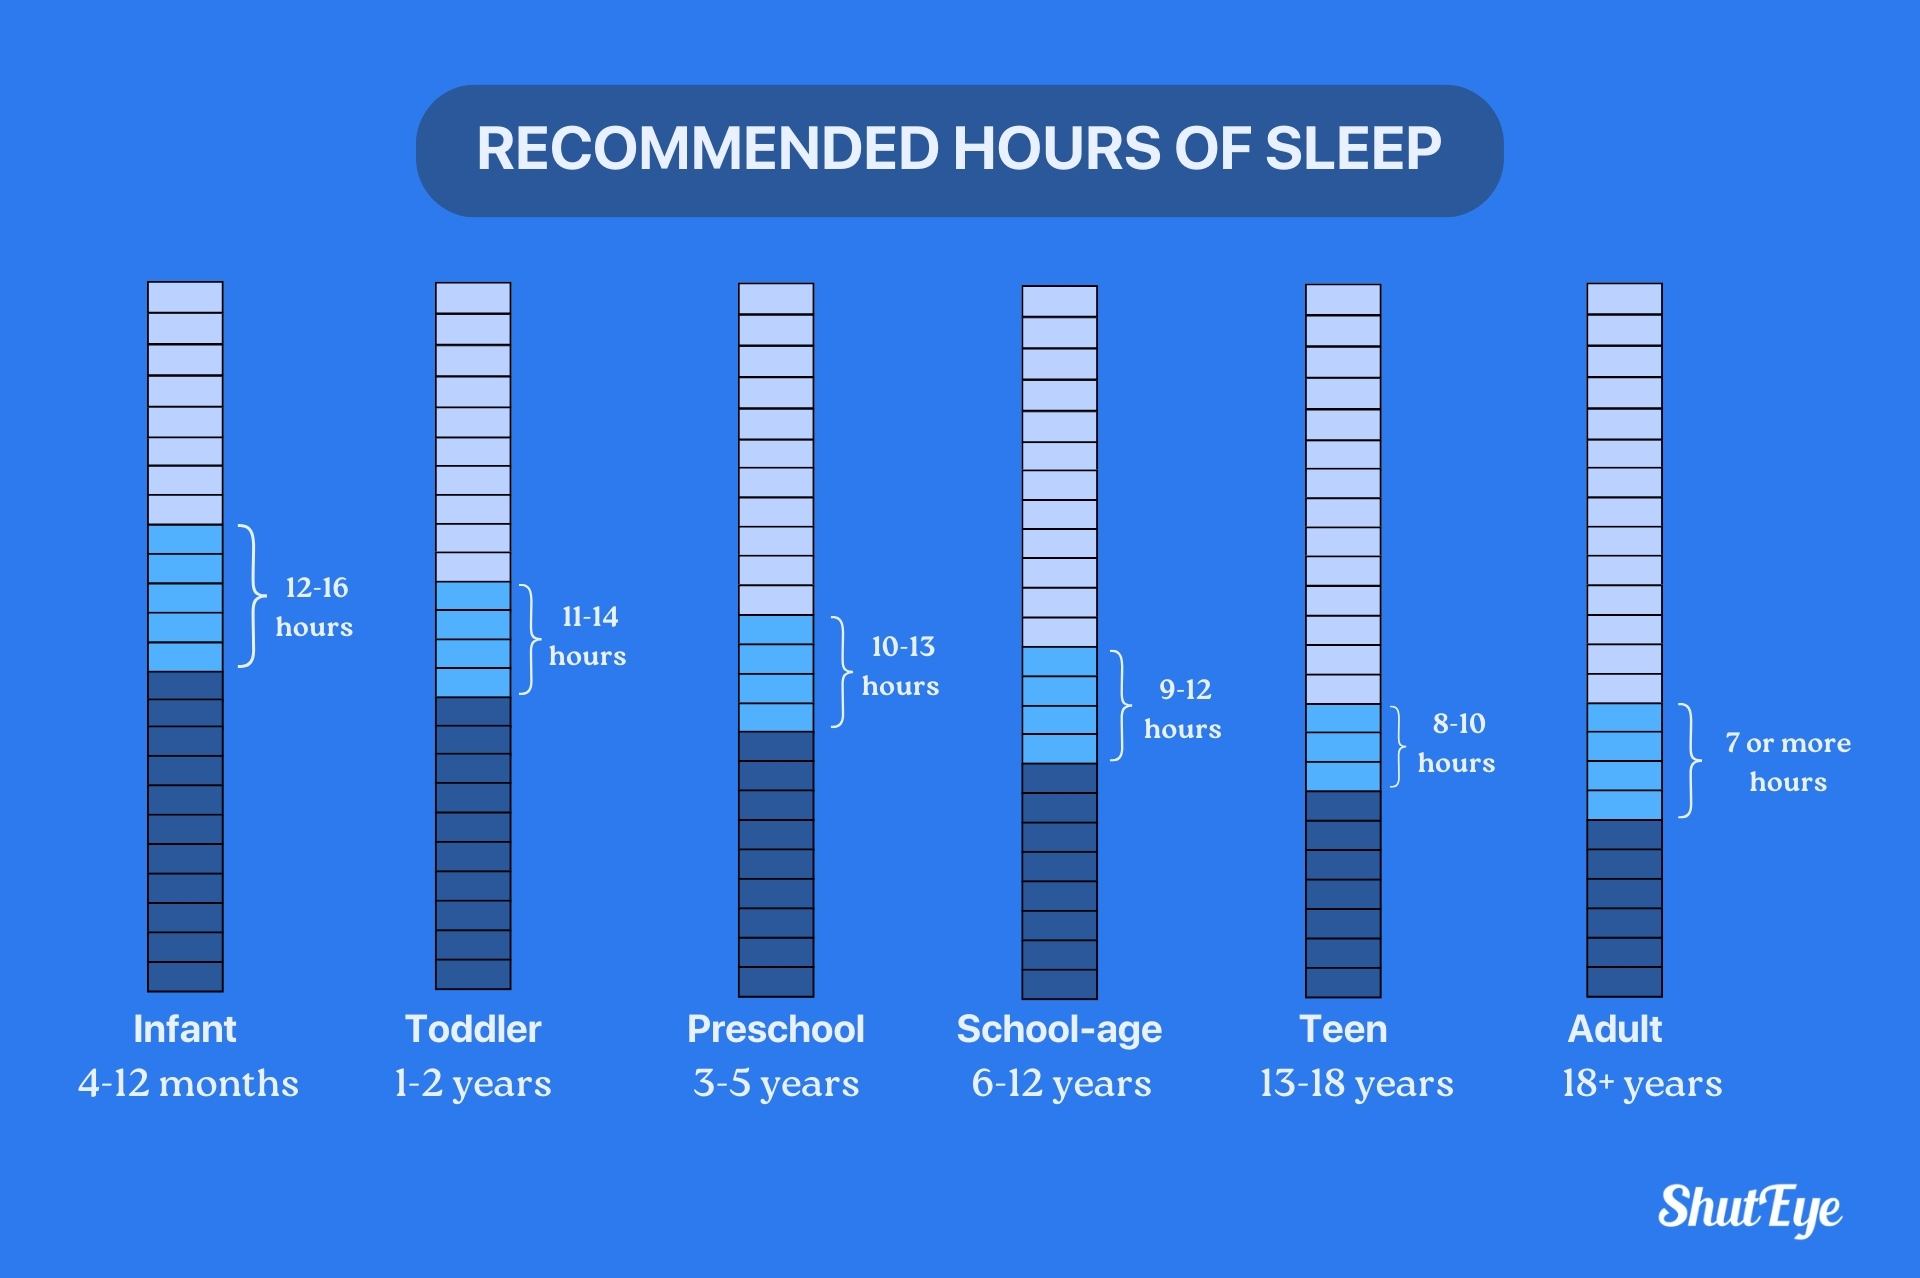 How much sleep do I need? Find an Ideal sleep duration for your age